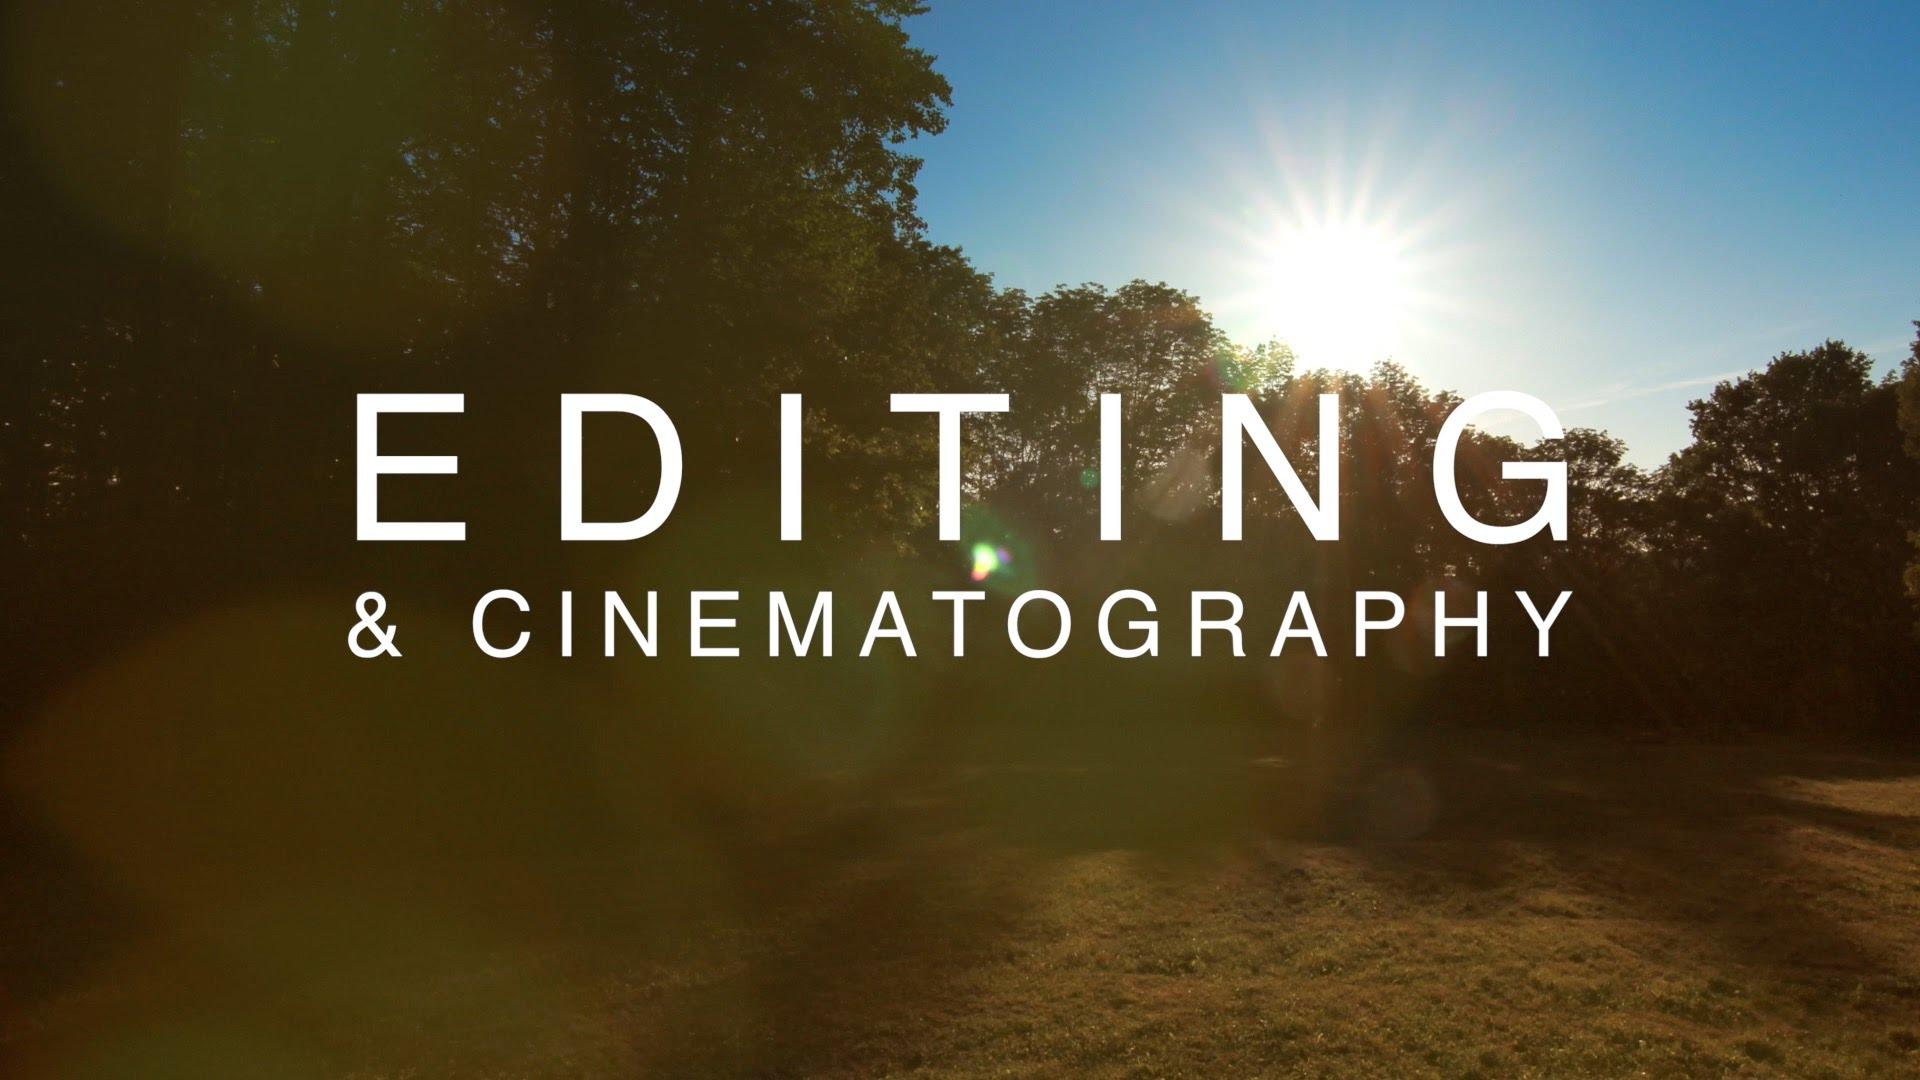 Cinematography. The Costa Rica News